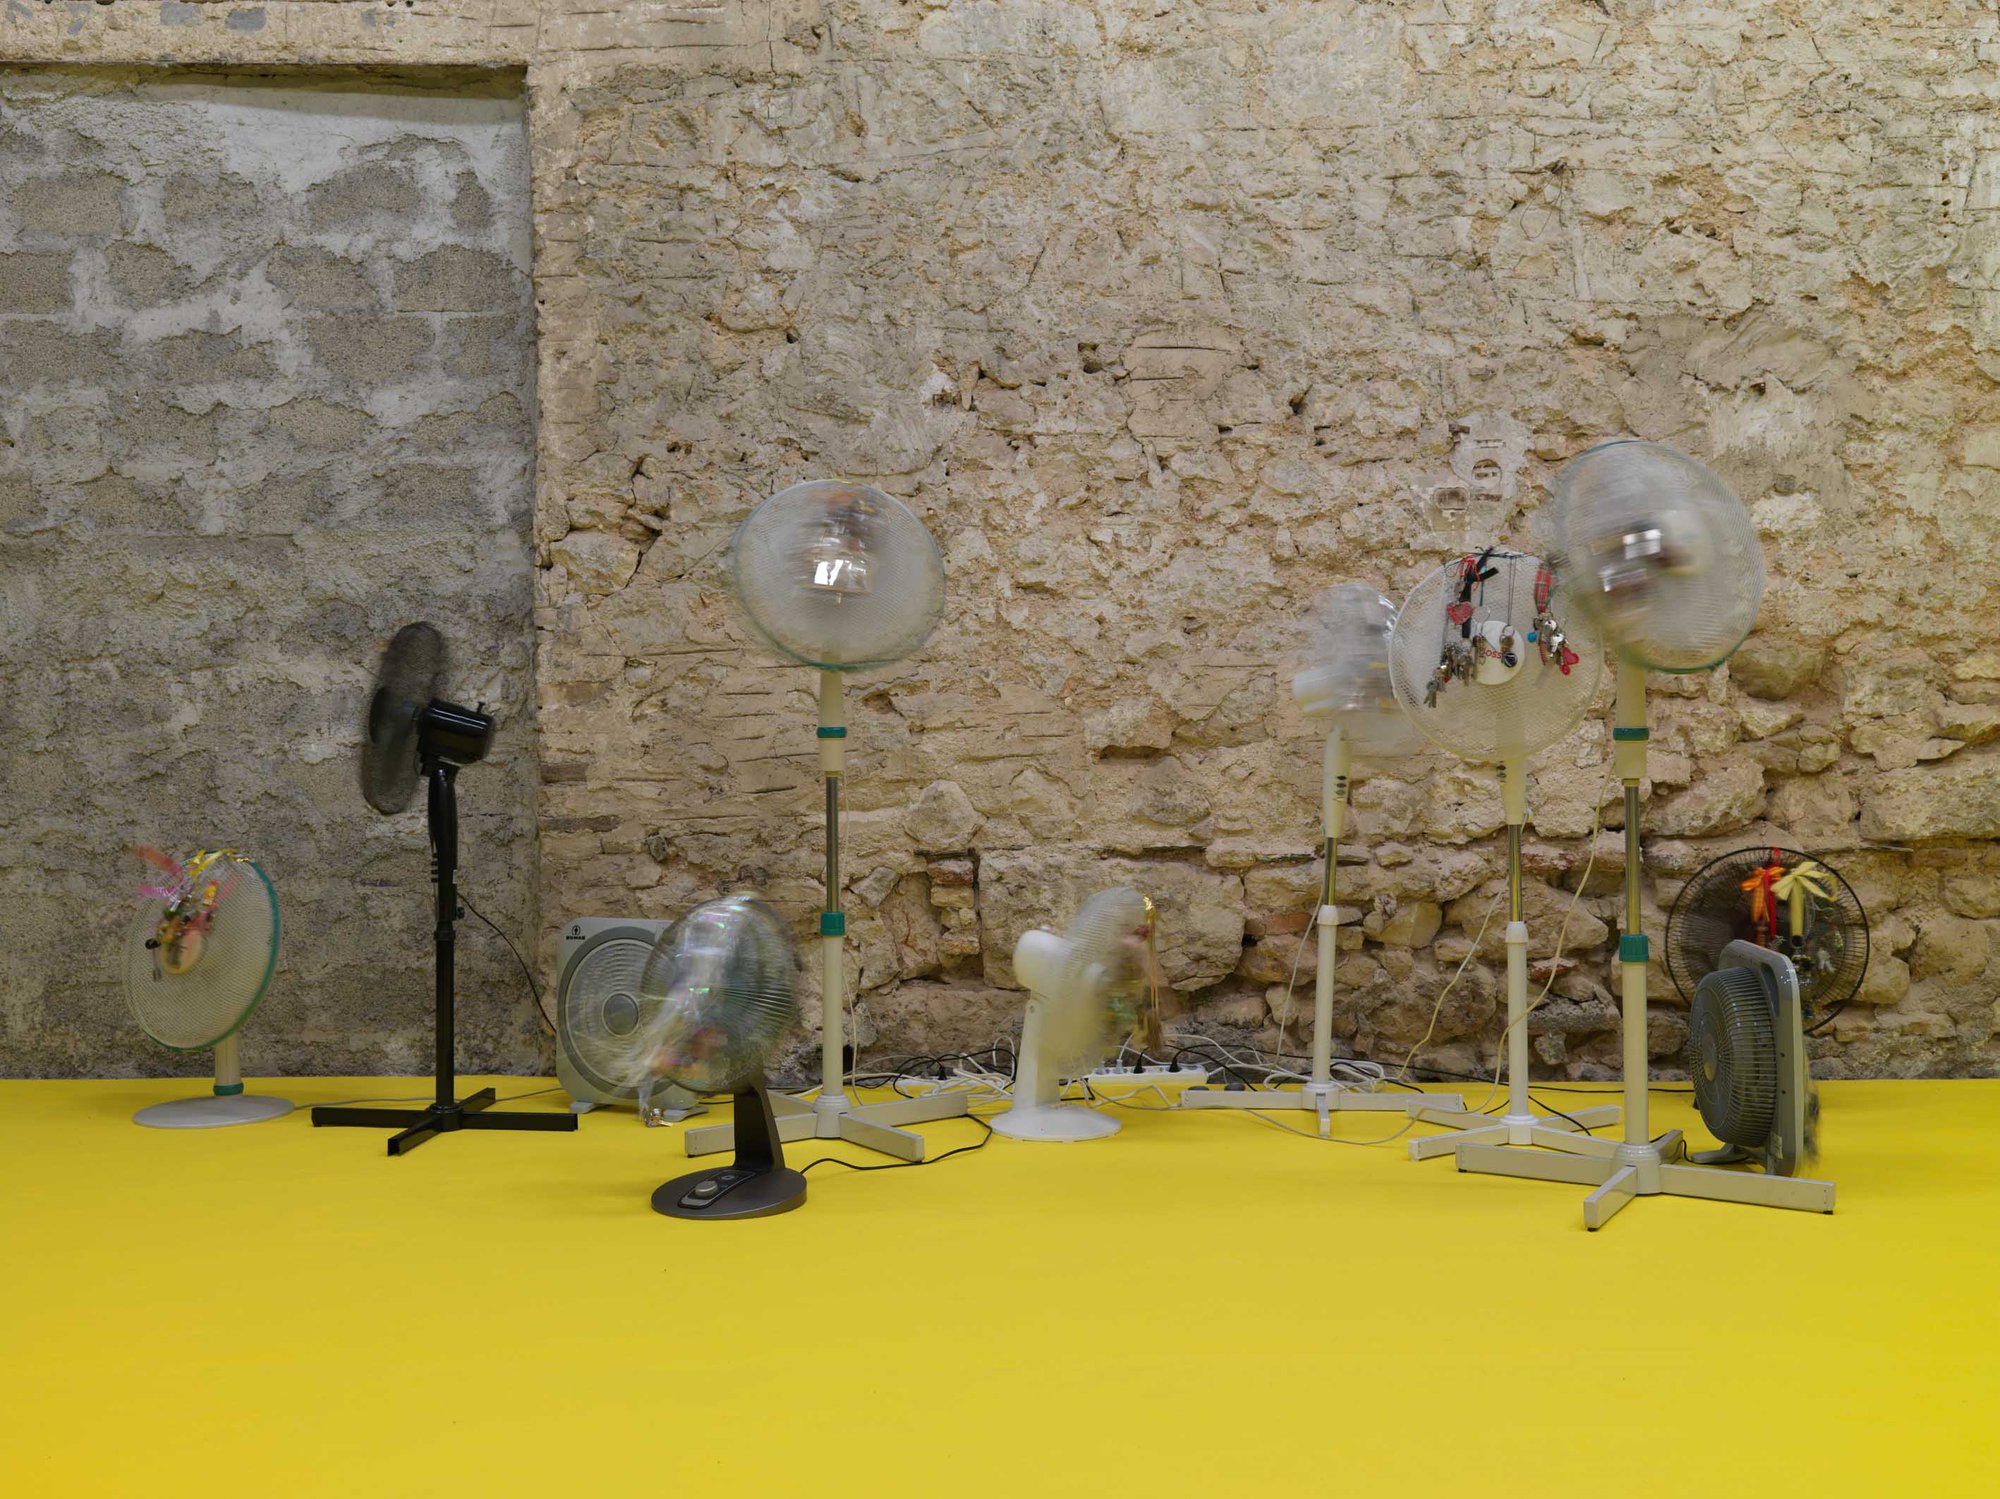 Iris Touliatou, EMOTIONAL INFINITY (THE SOUND OF THEM COMING BACK AMPLIFIED AND LOOPED), oscillating fans, duplicated house keys, pre owned key chains, string, ribbons, gift bows, wire, timers, multiplugs, outlets, dimensions variable, 2022